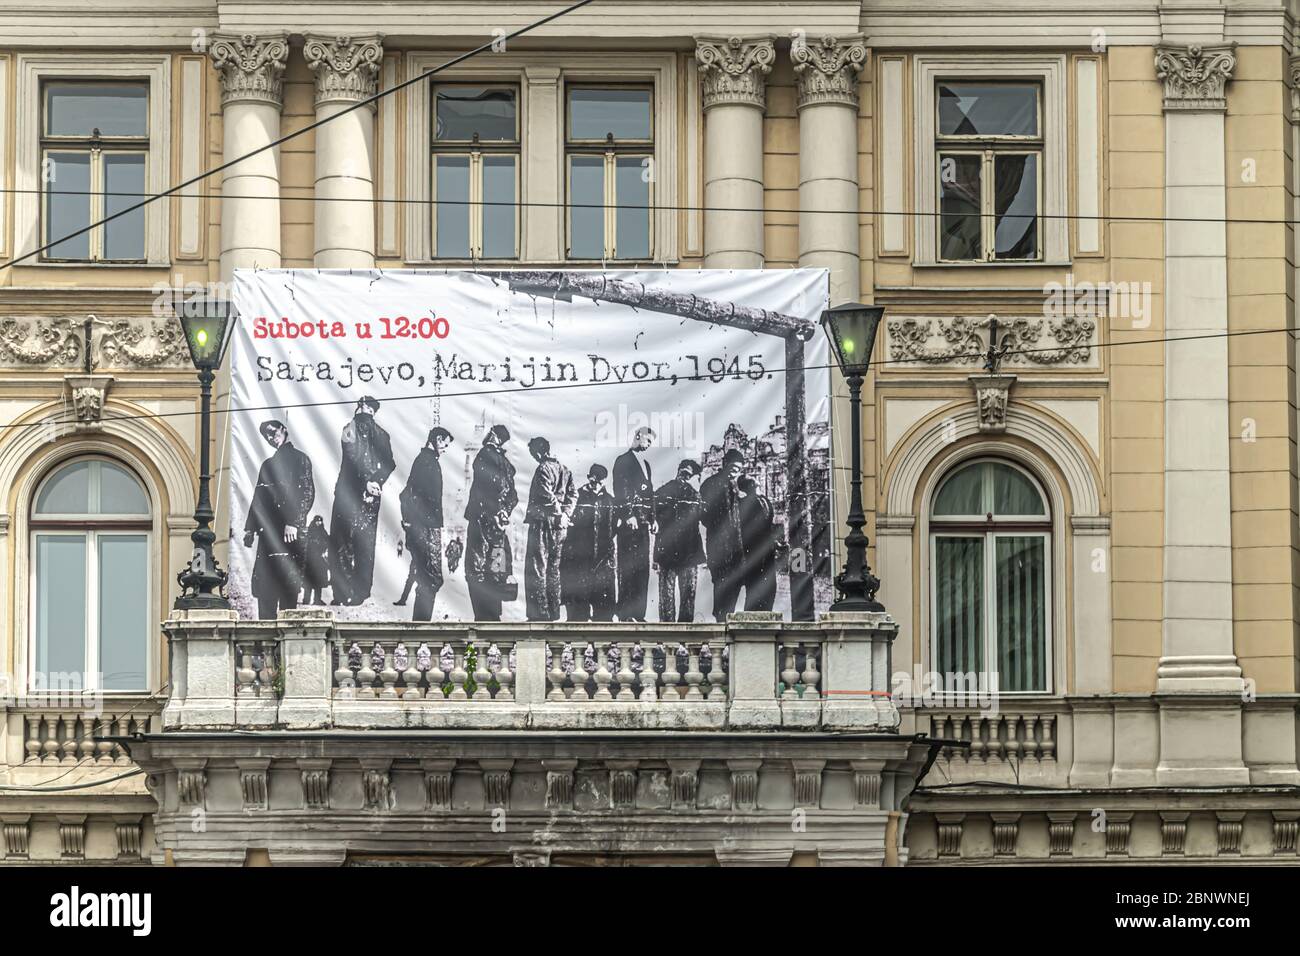 Anti-fascist protest in Sarajevo. A banner reminiscent of the NDH (The Independent State of Croatia) cruelty  in Sarajevo during 1945 Stock Photo